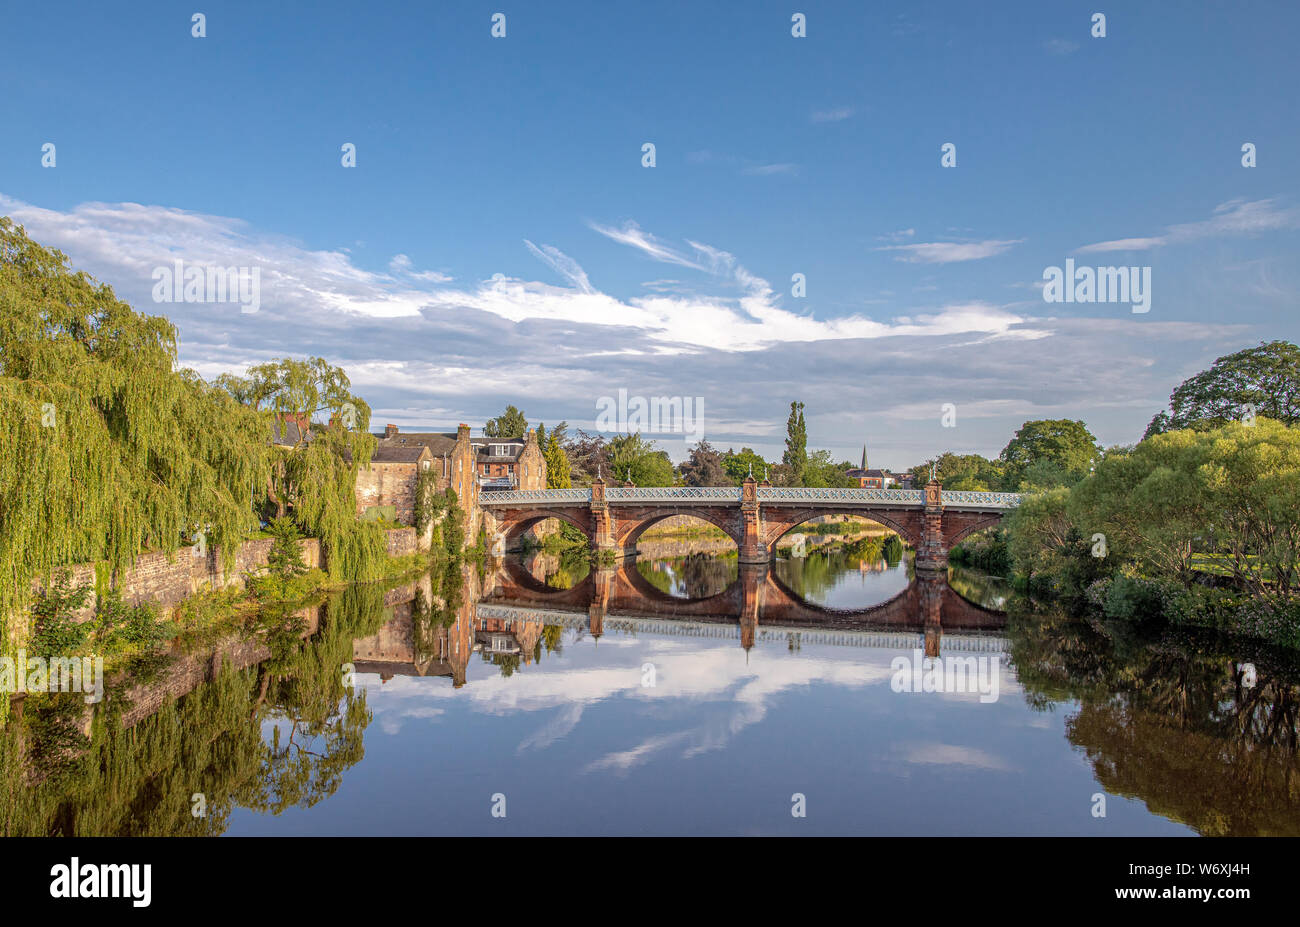 Dumfries in Scotland along the River Nith Stock Photo